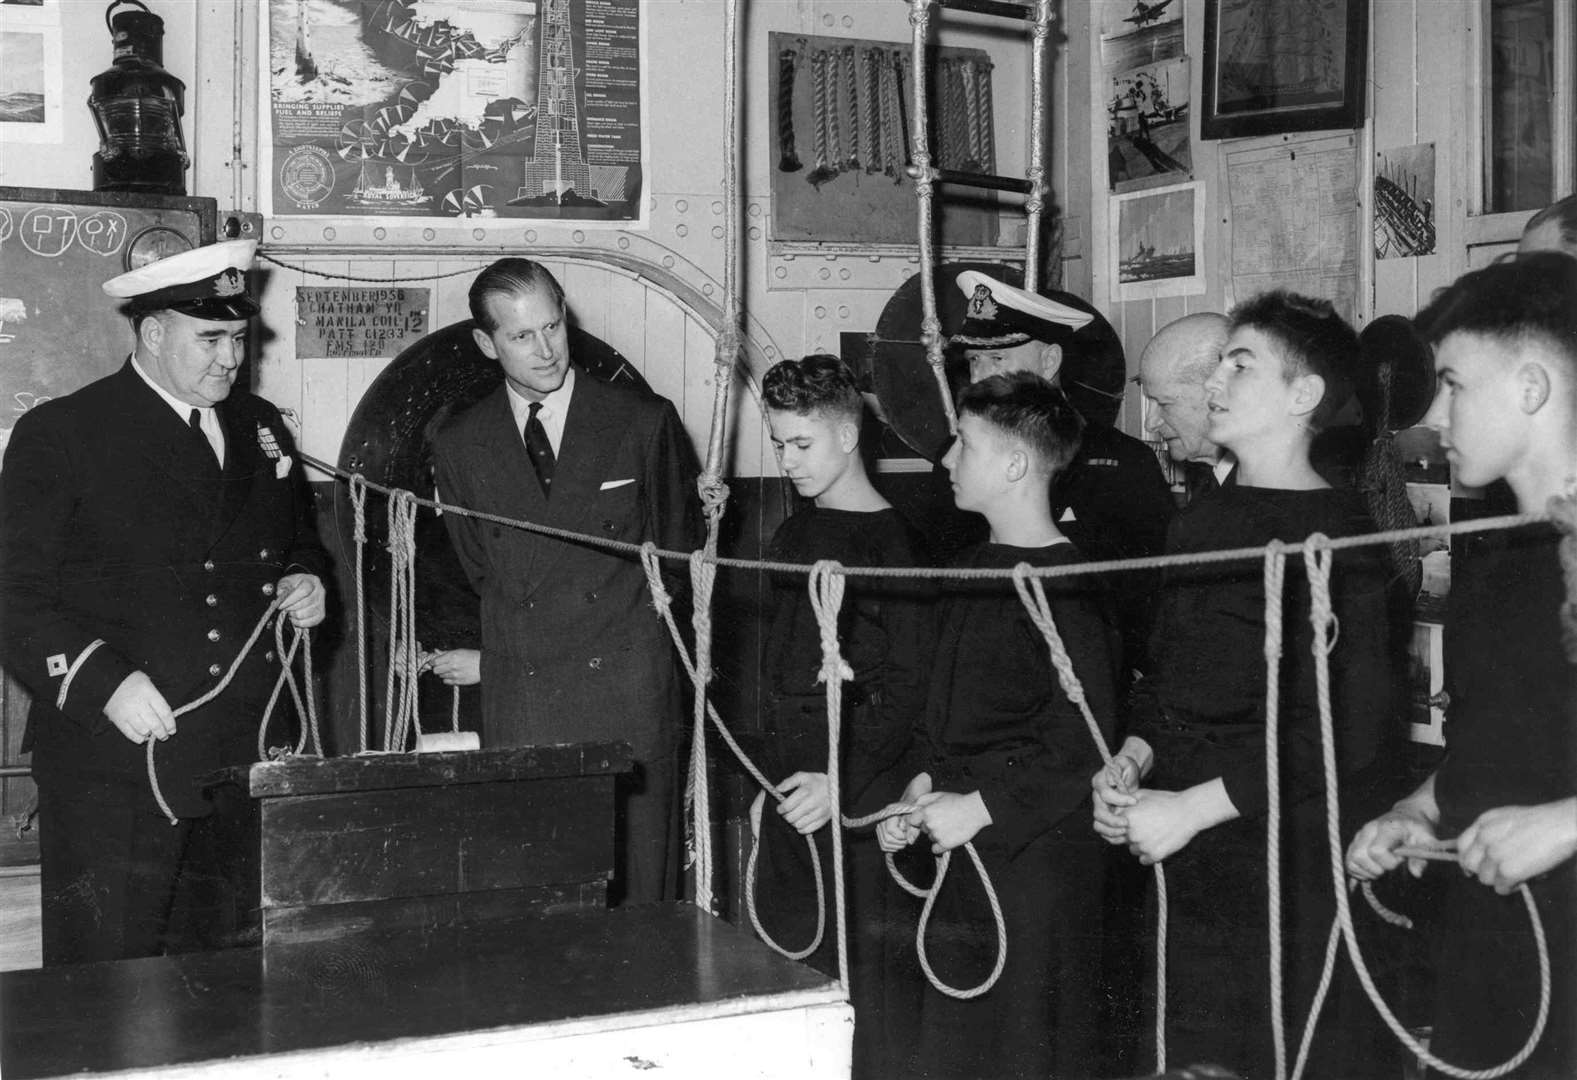 In November 1960 these boys demonstrated their knot-tying skills when the Duke of Edinburgh visited the training ship Arethusa. Picture from: Images of Royal Kent